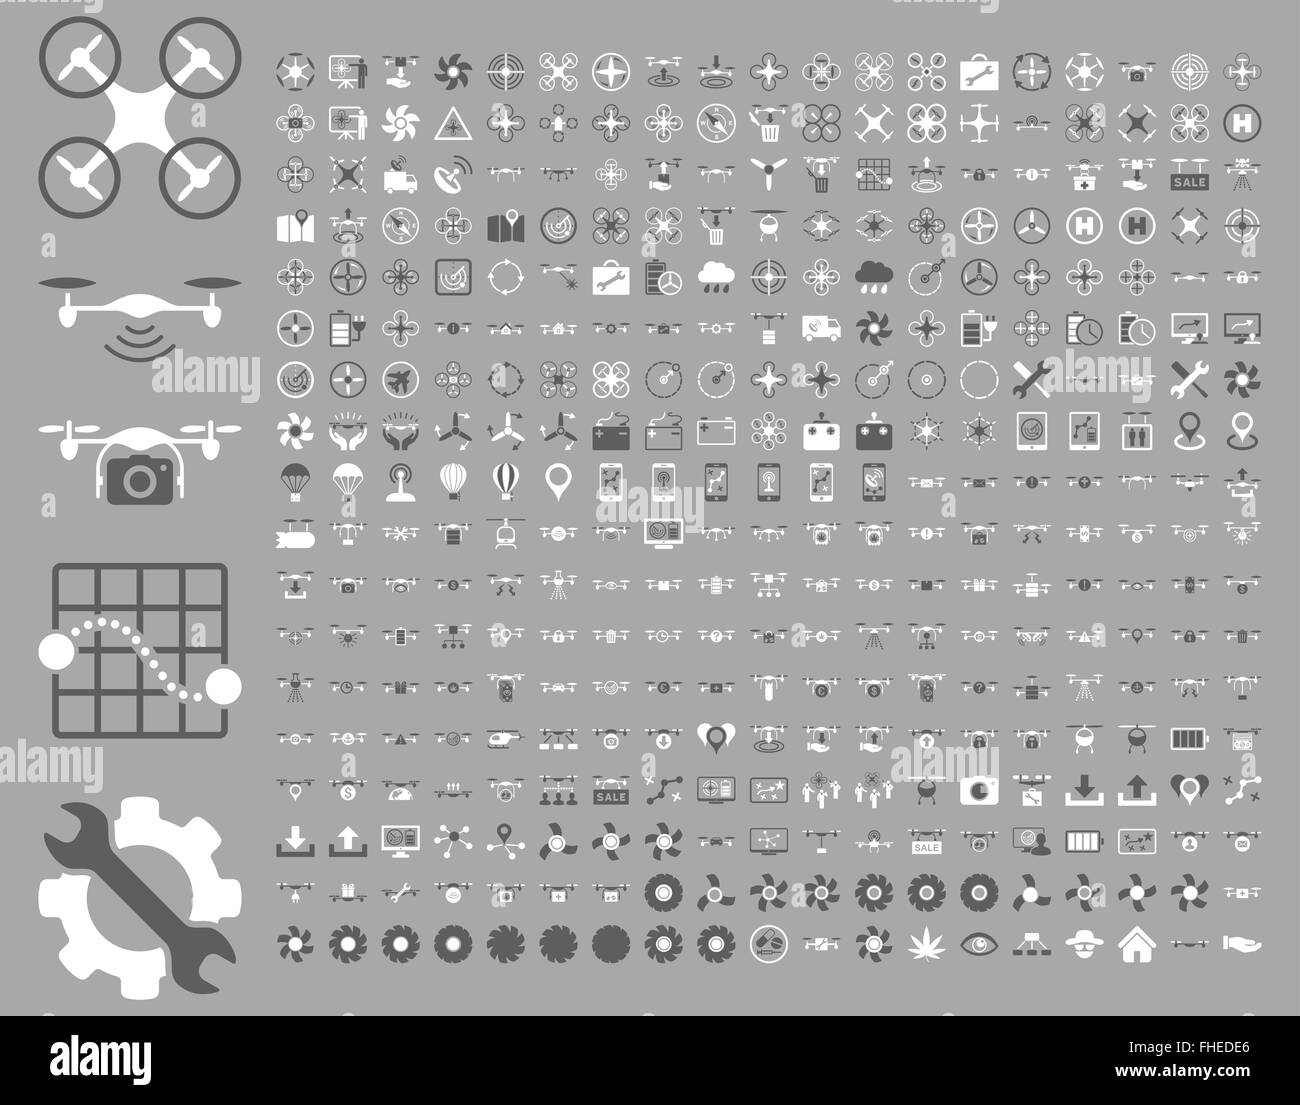 Air drones and quadcopter tools icons Stock Photo